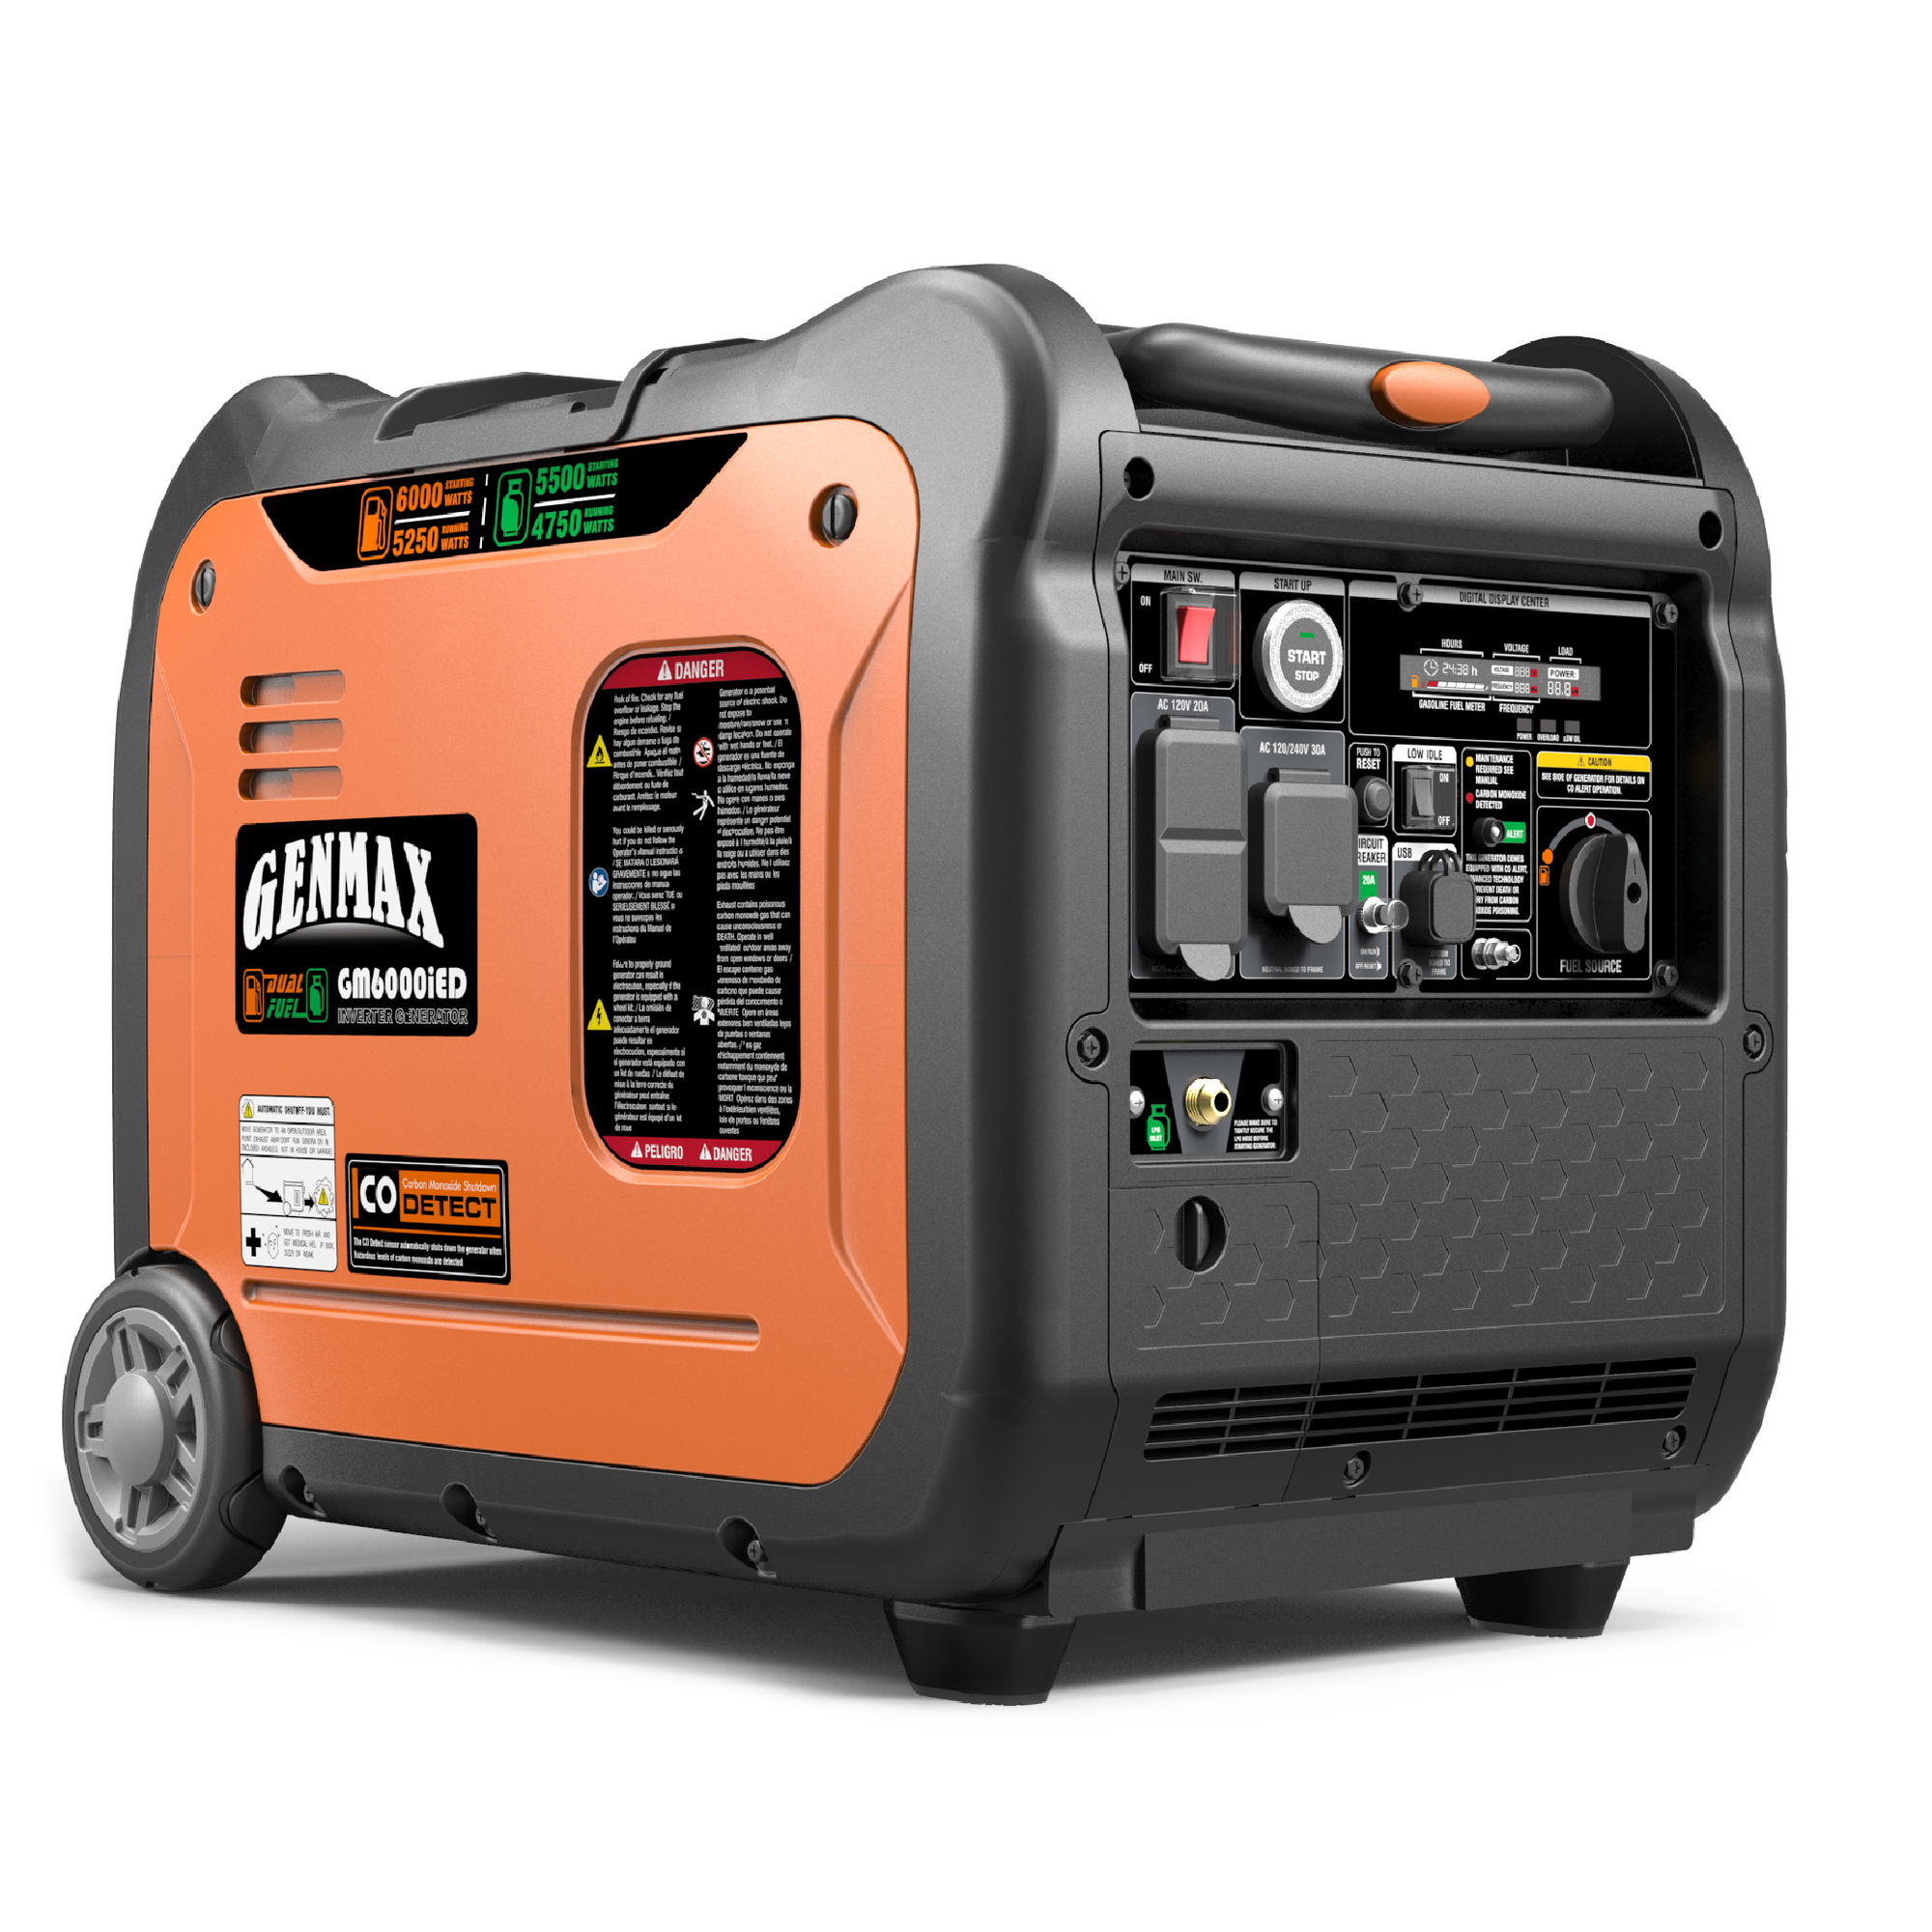 GENMAX, Portable Inverter Generator, 6000W Dual Fuel, Surge Watts 6000 Rated Watts 5250 Voltage 120/240 Model GM6000iED